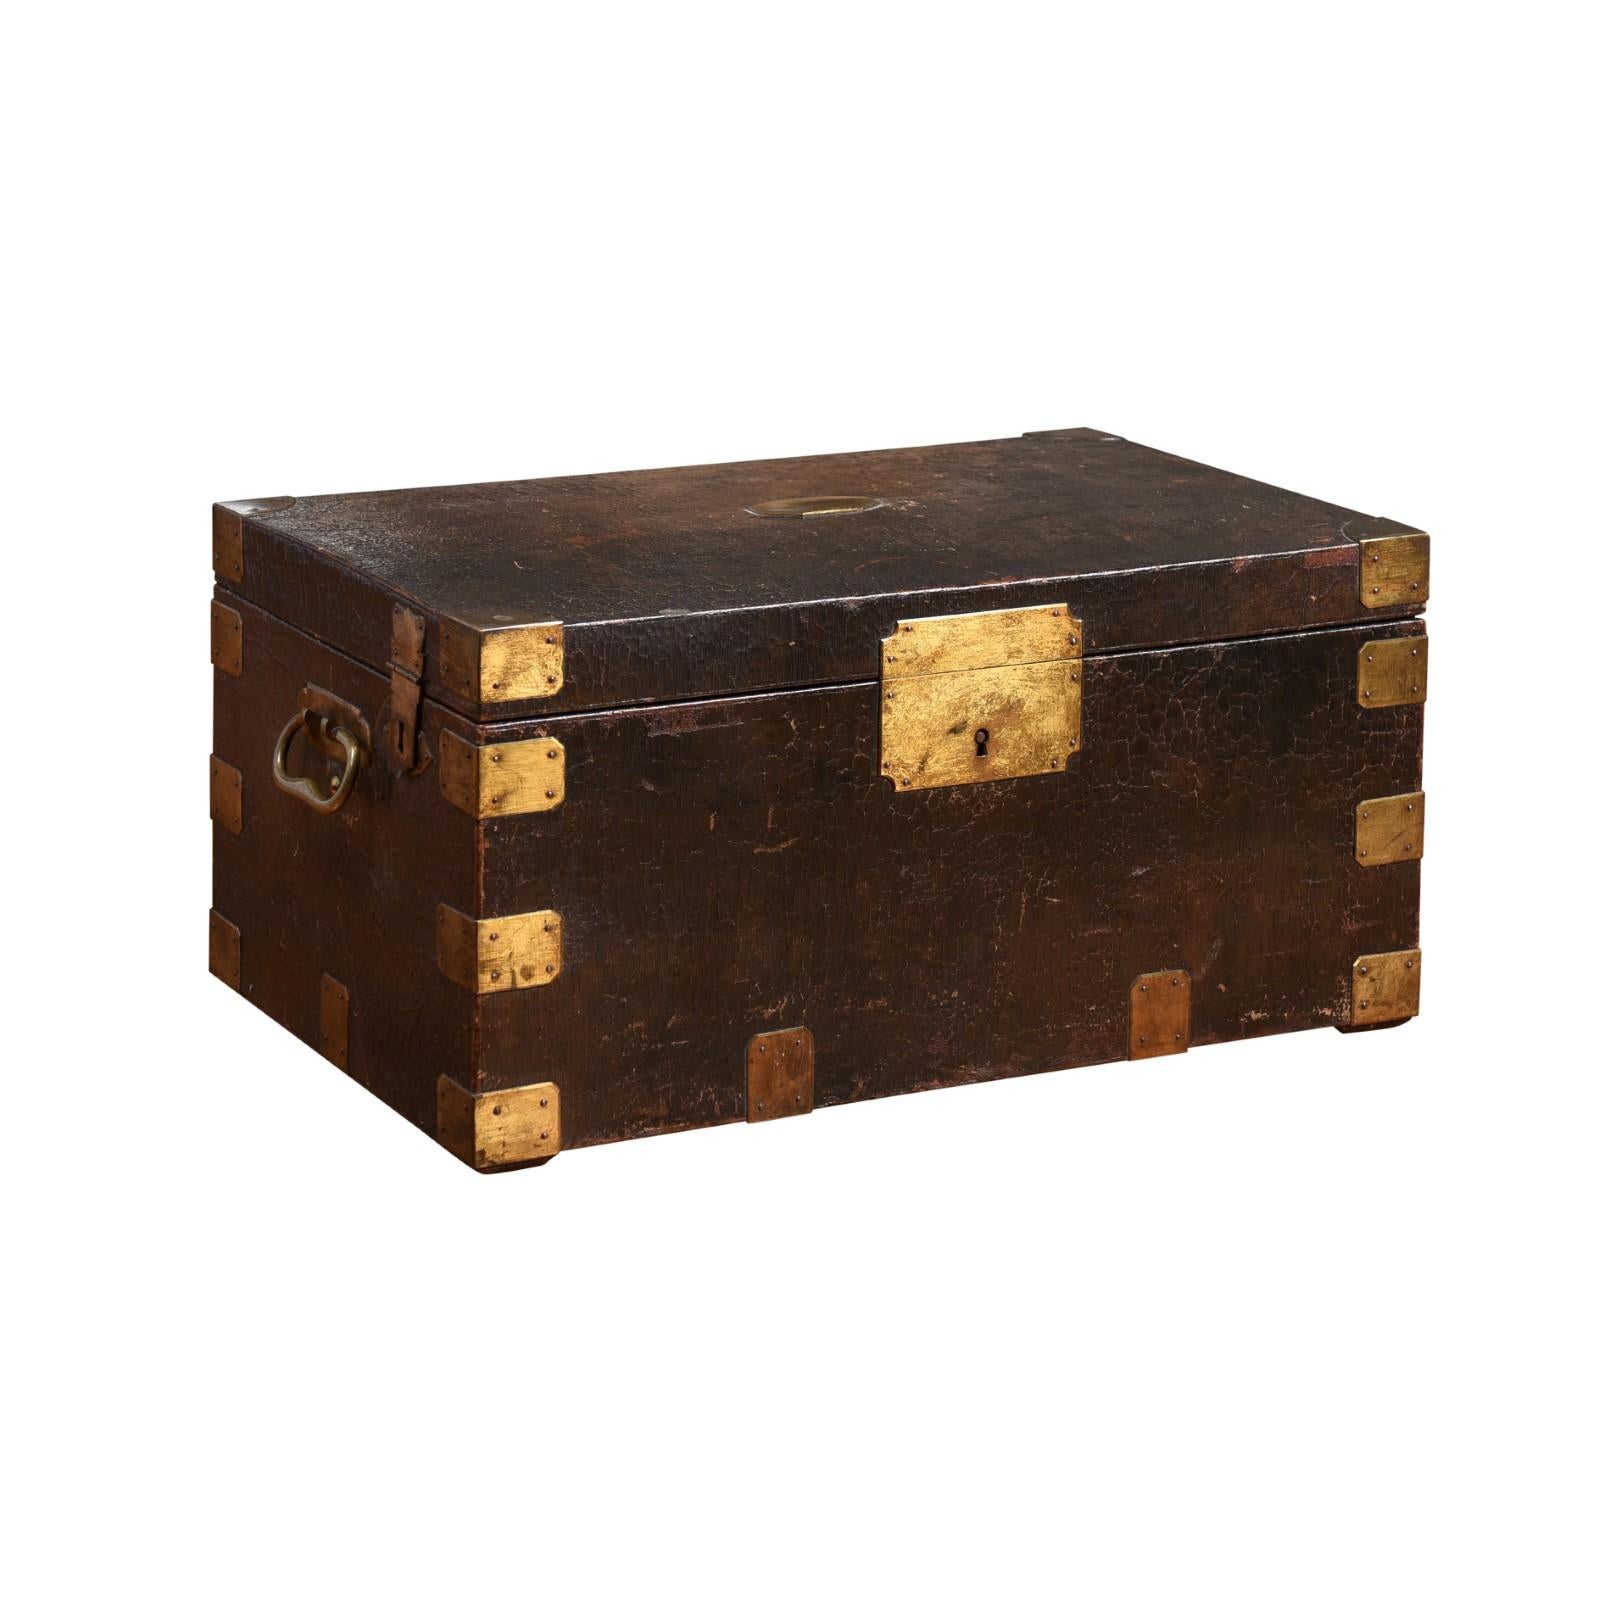 A French wooden decorative box from the 19th century from the Maison 'Gellée Gainier' à la Boule d'Or, Paris, leather bound with brass braces, presenting a compartmented interior and brass lateral handles. Created on the Île de la Cité close to the